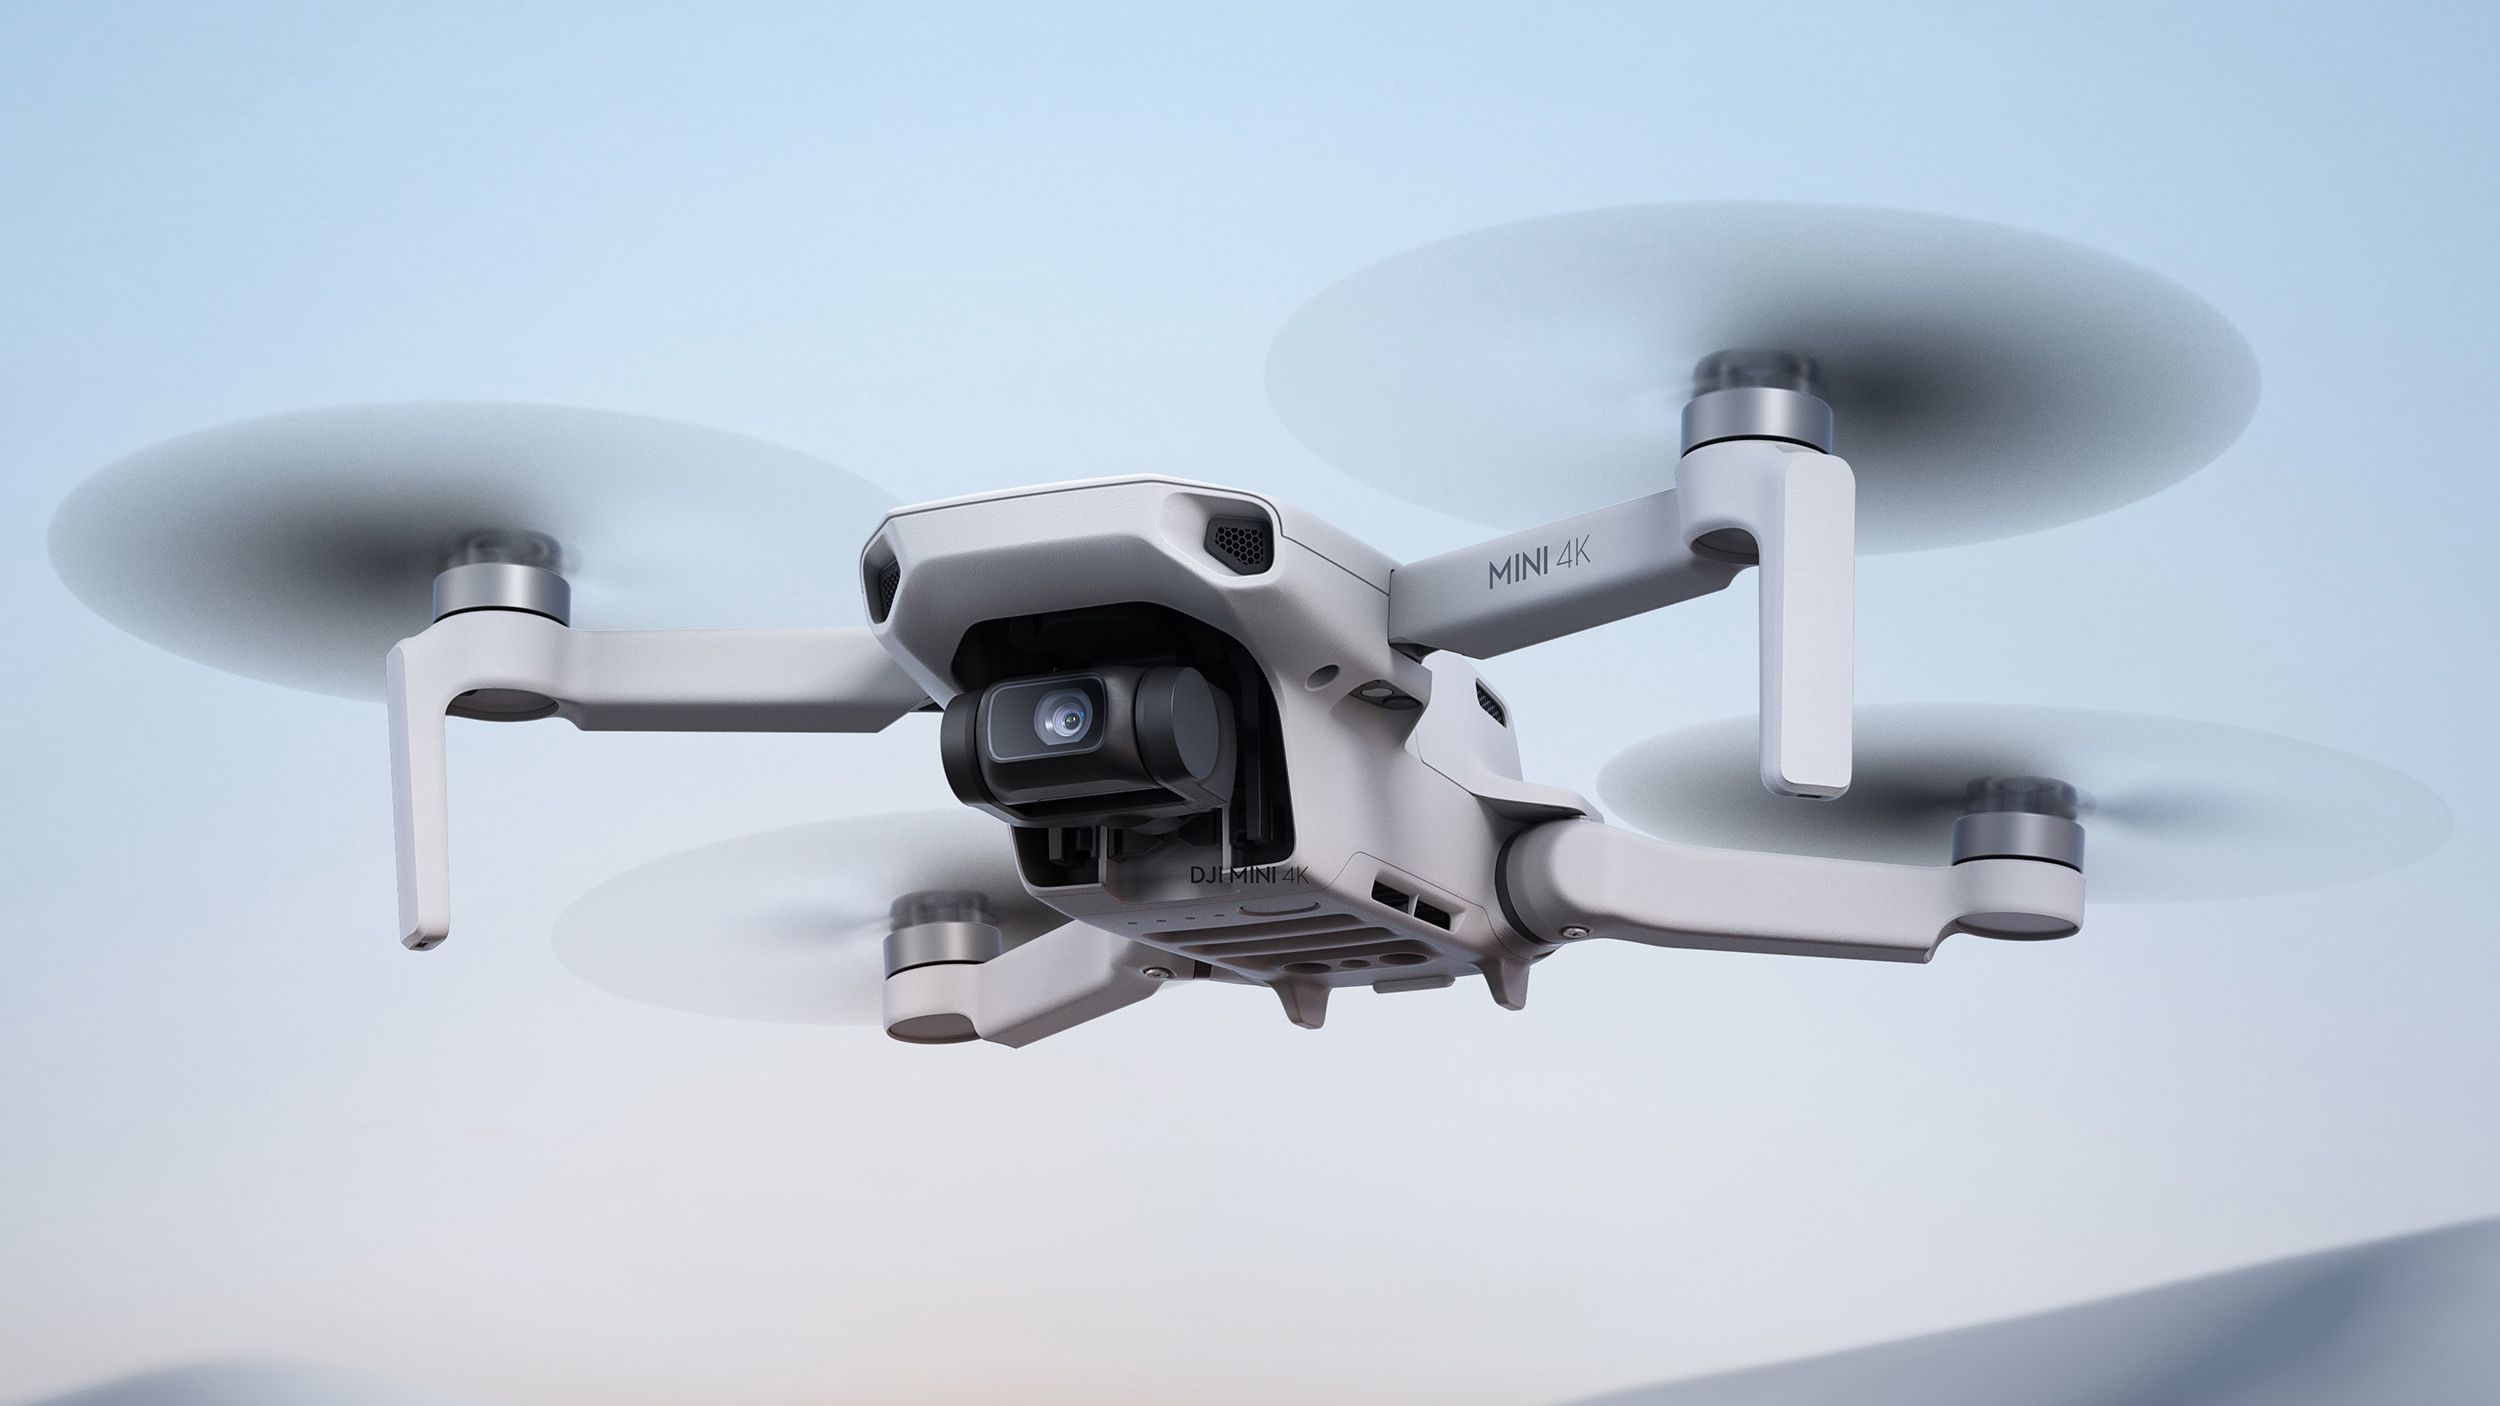 DJI quietly brings the Mini 4K to the US